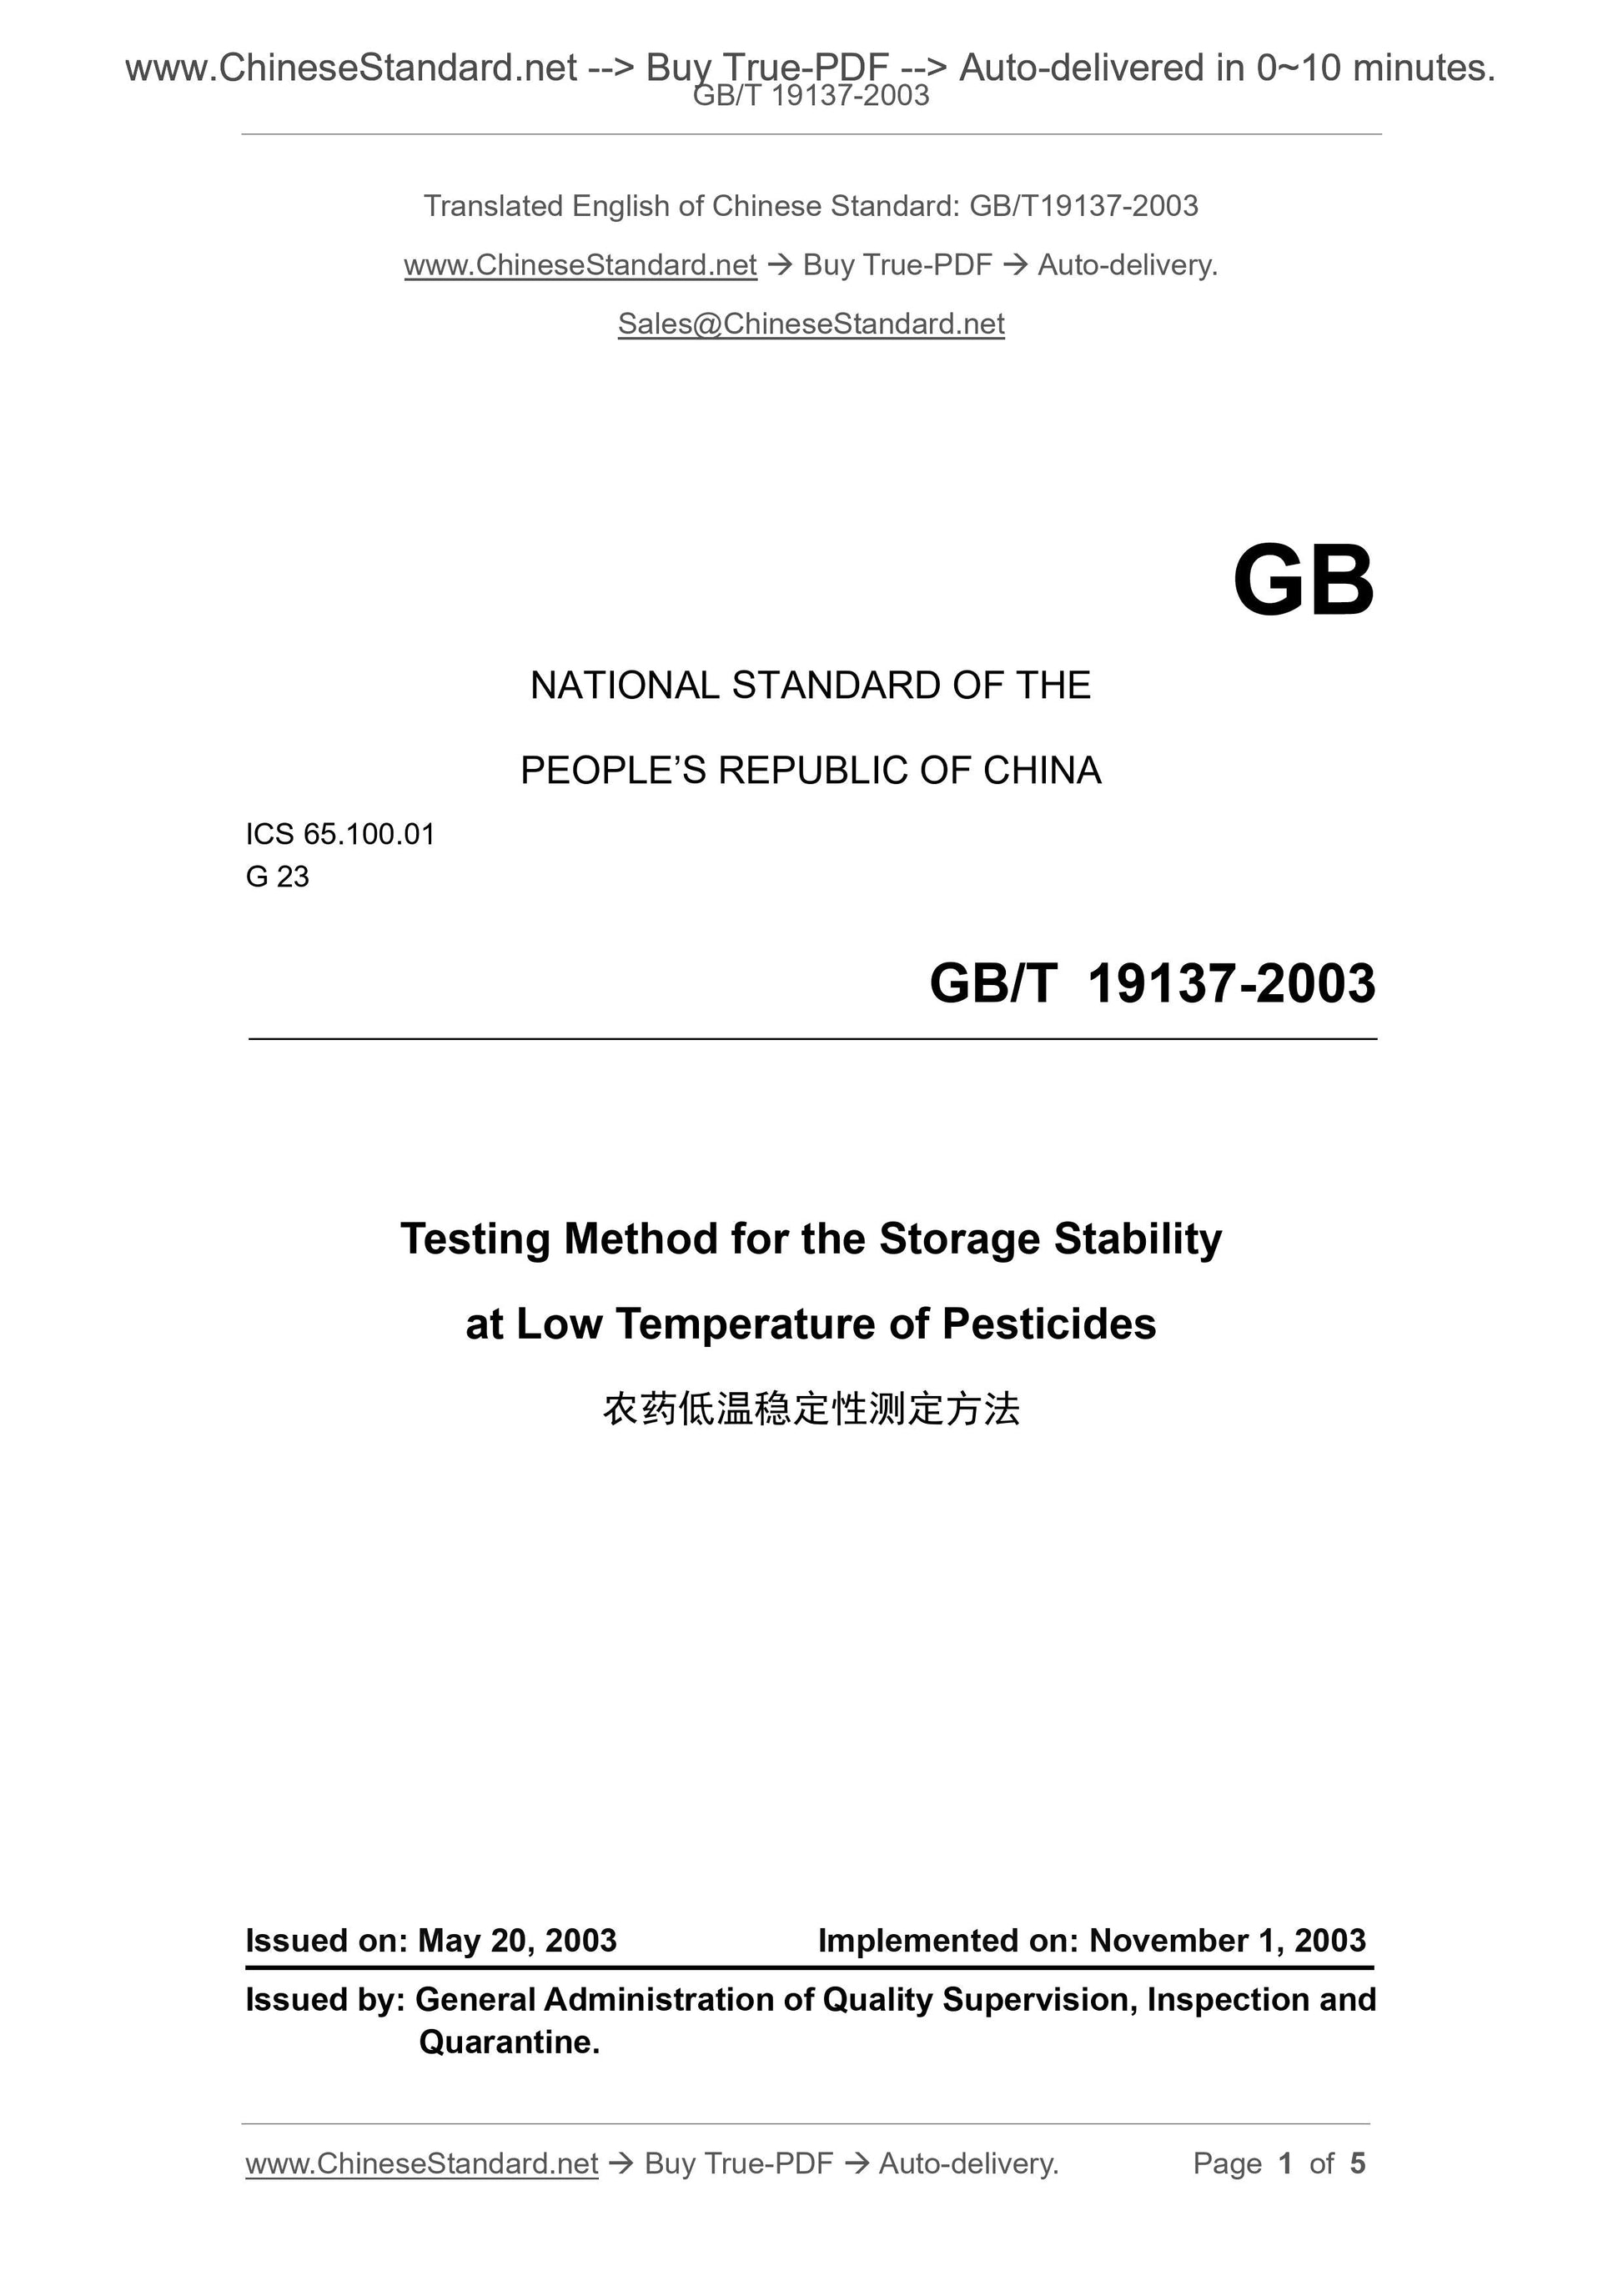 GB/T 19137-2003 Page 1